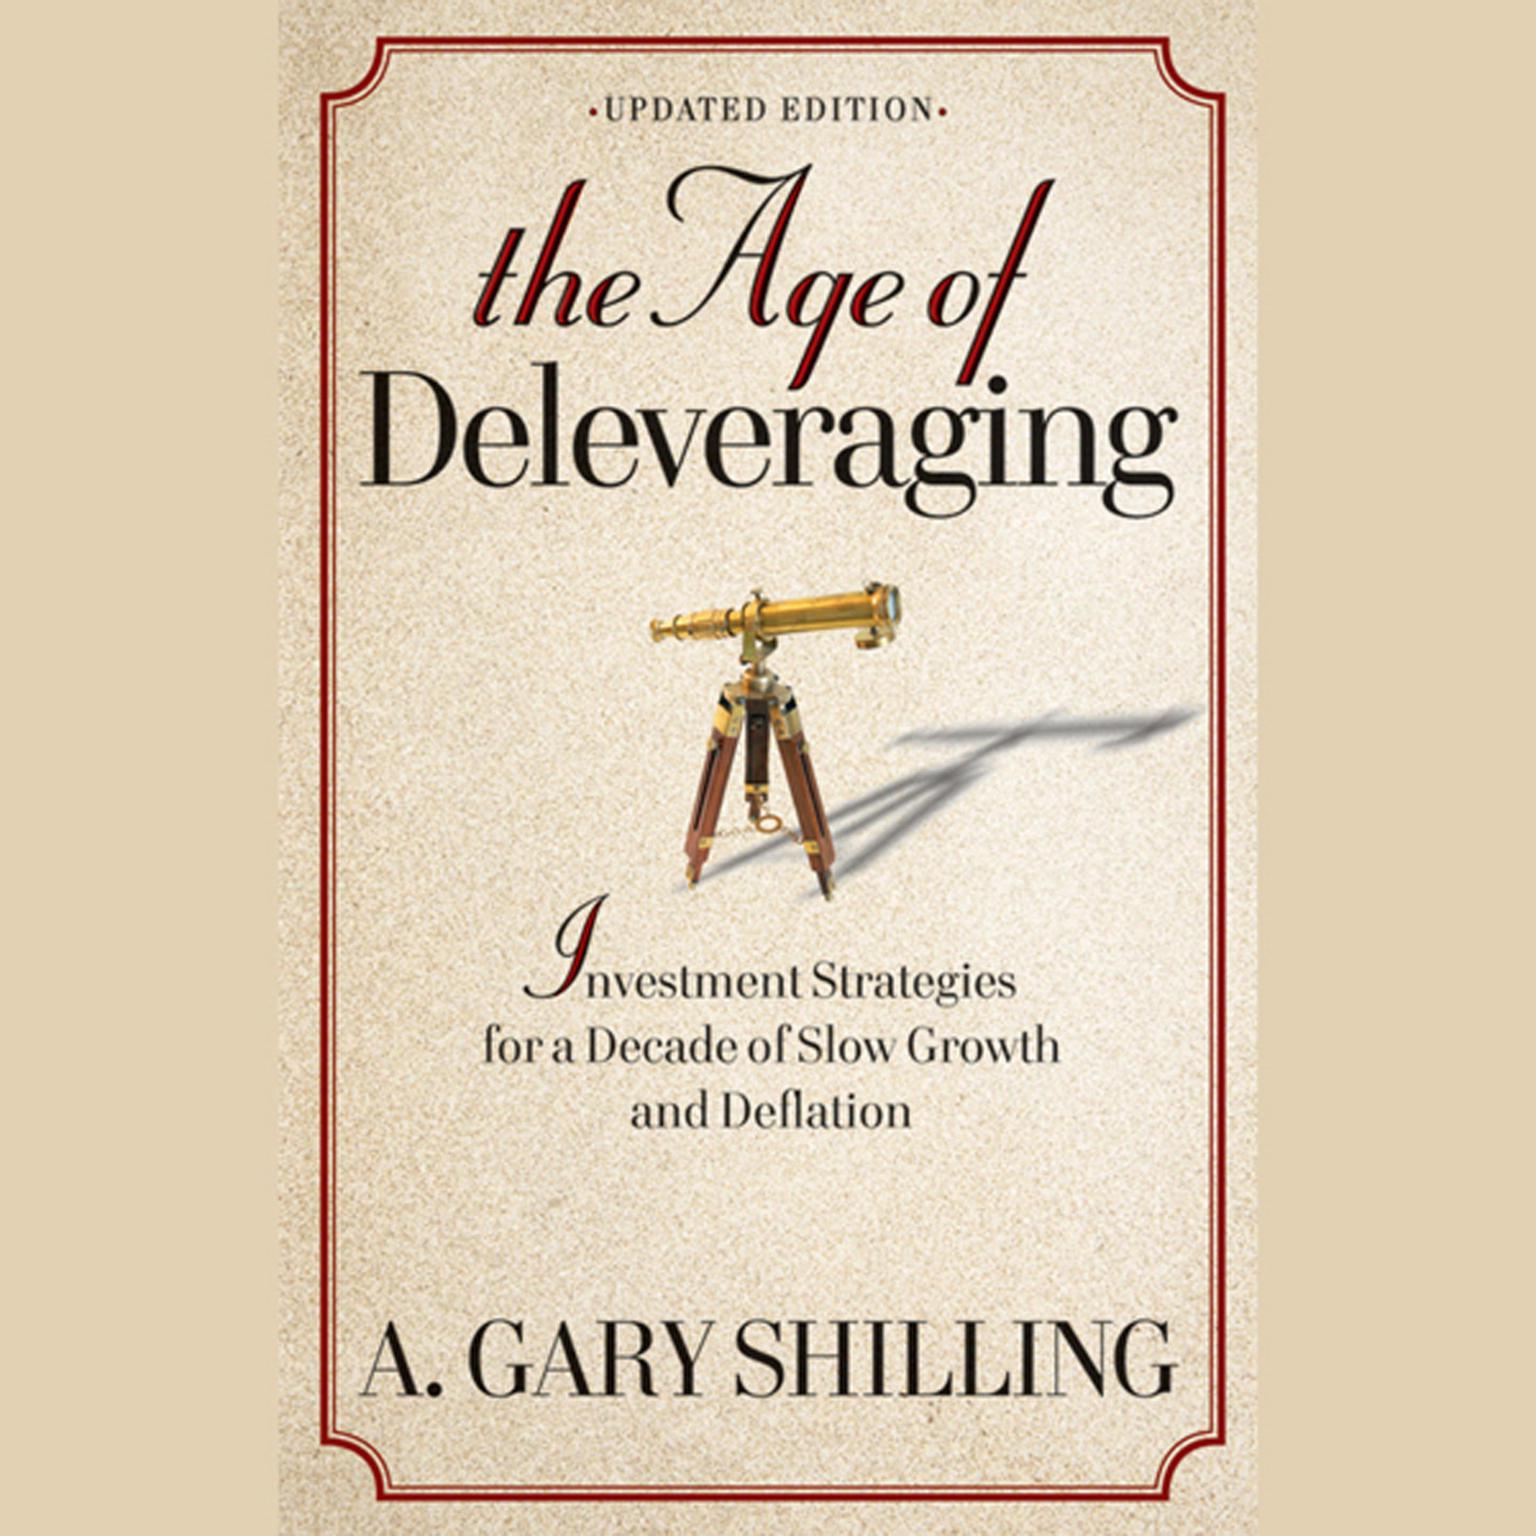 The Age of Deleveraging: Investment Strategies for a Decade of Slow Growth and Deflation Audiobook, by A. Gary Shilling